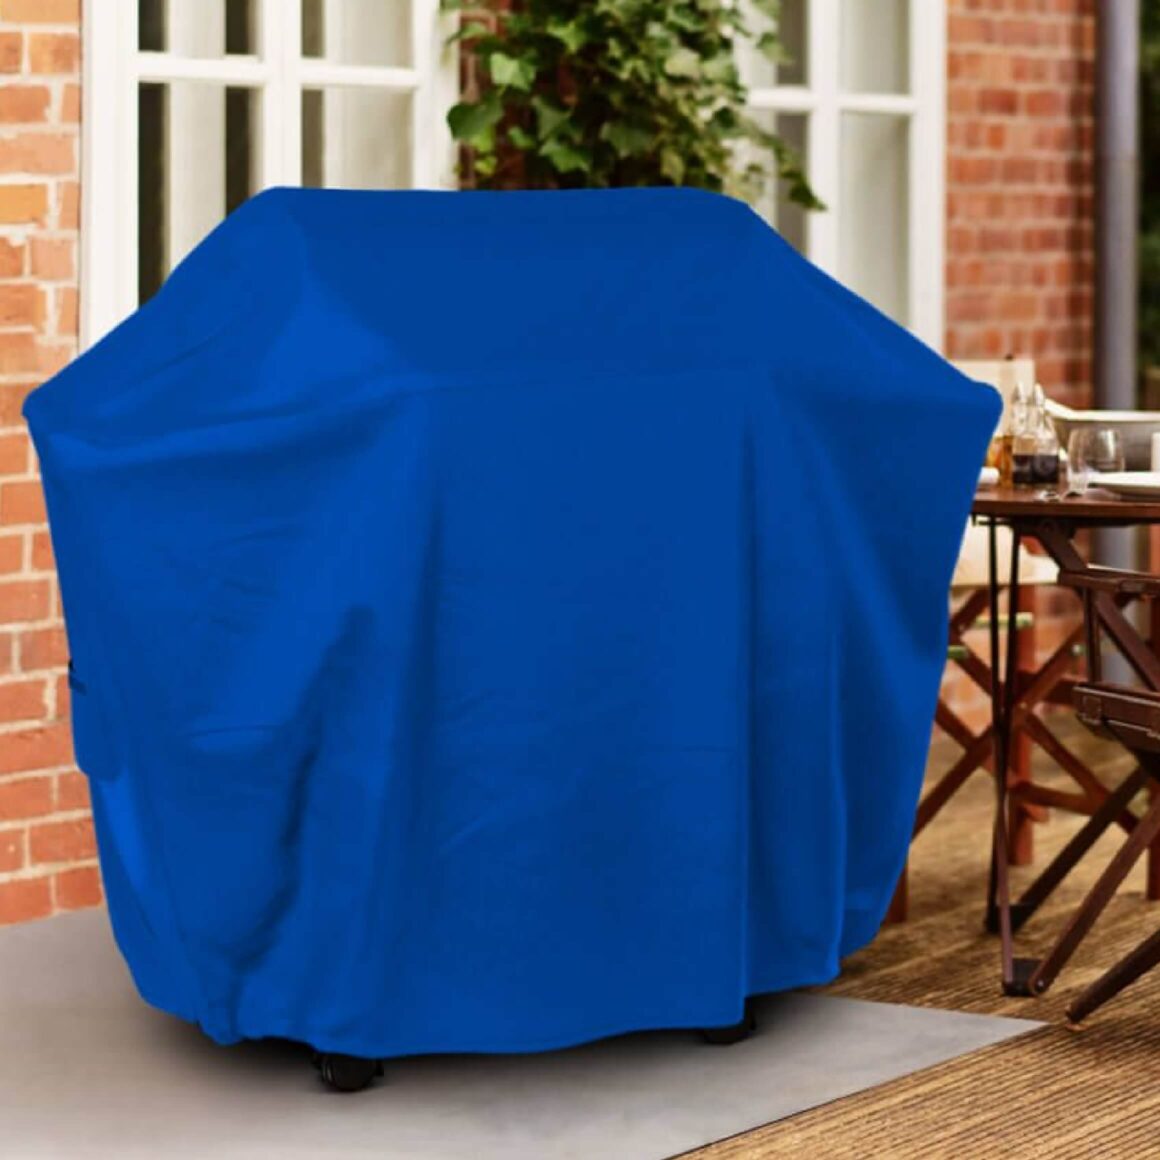 Safeguarding Your BBQ with a Stylish Cover